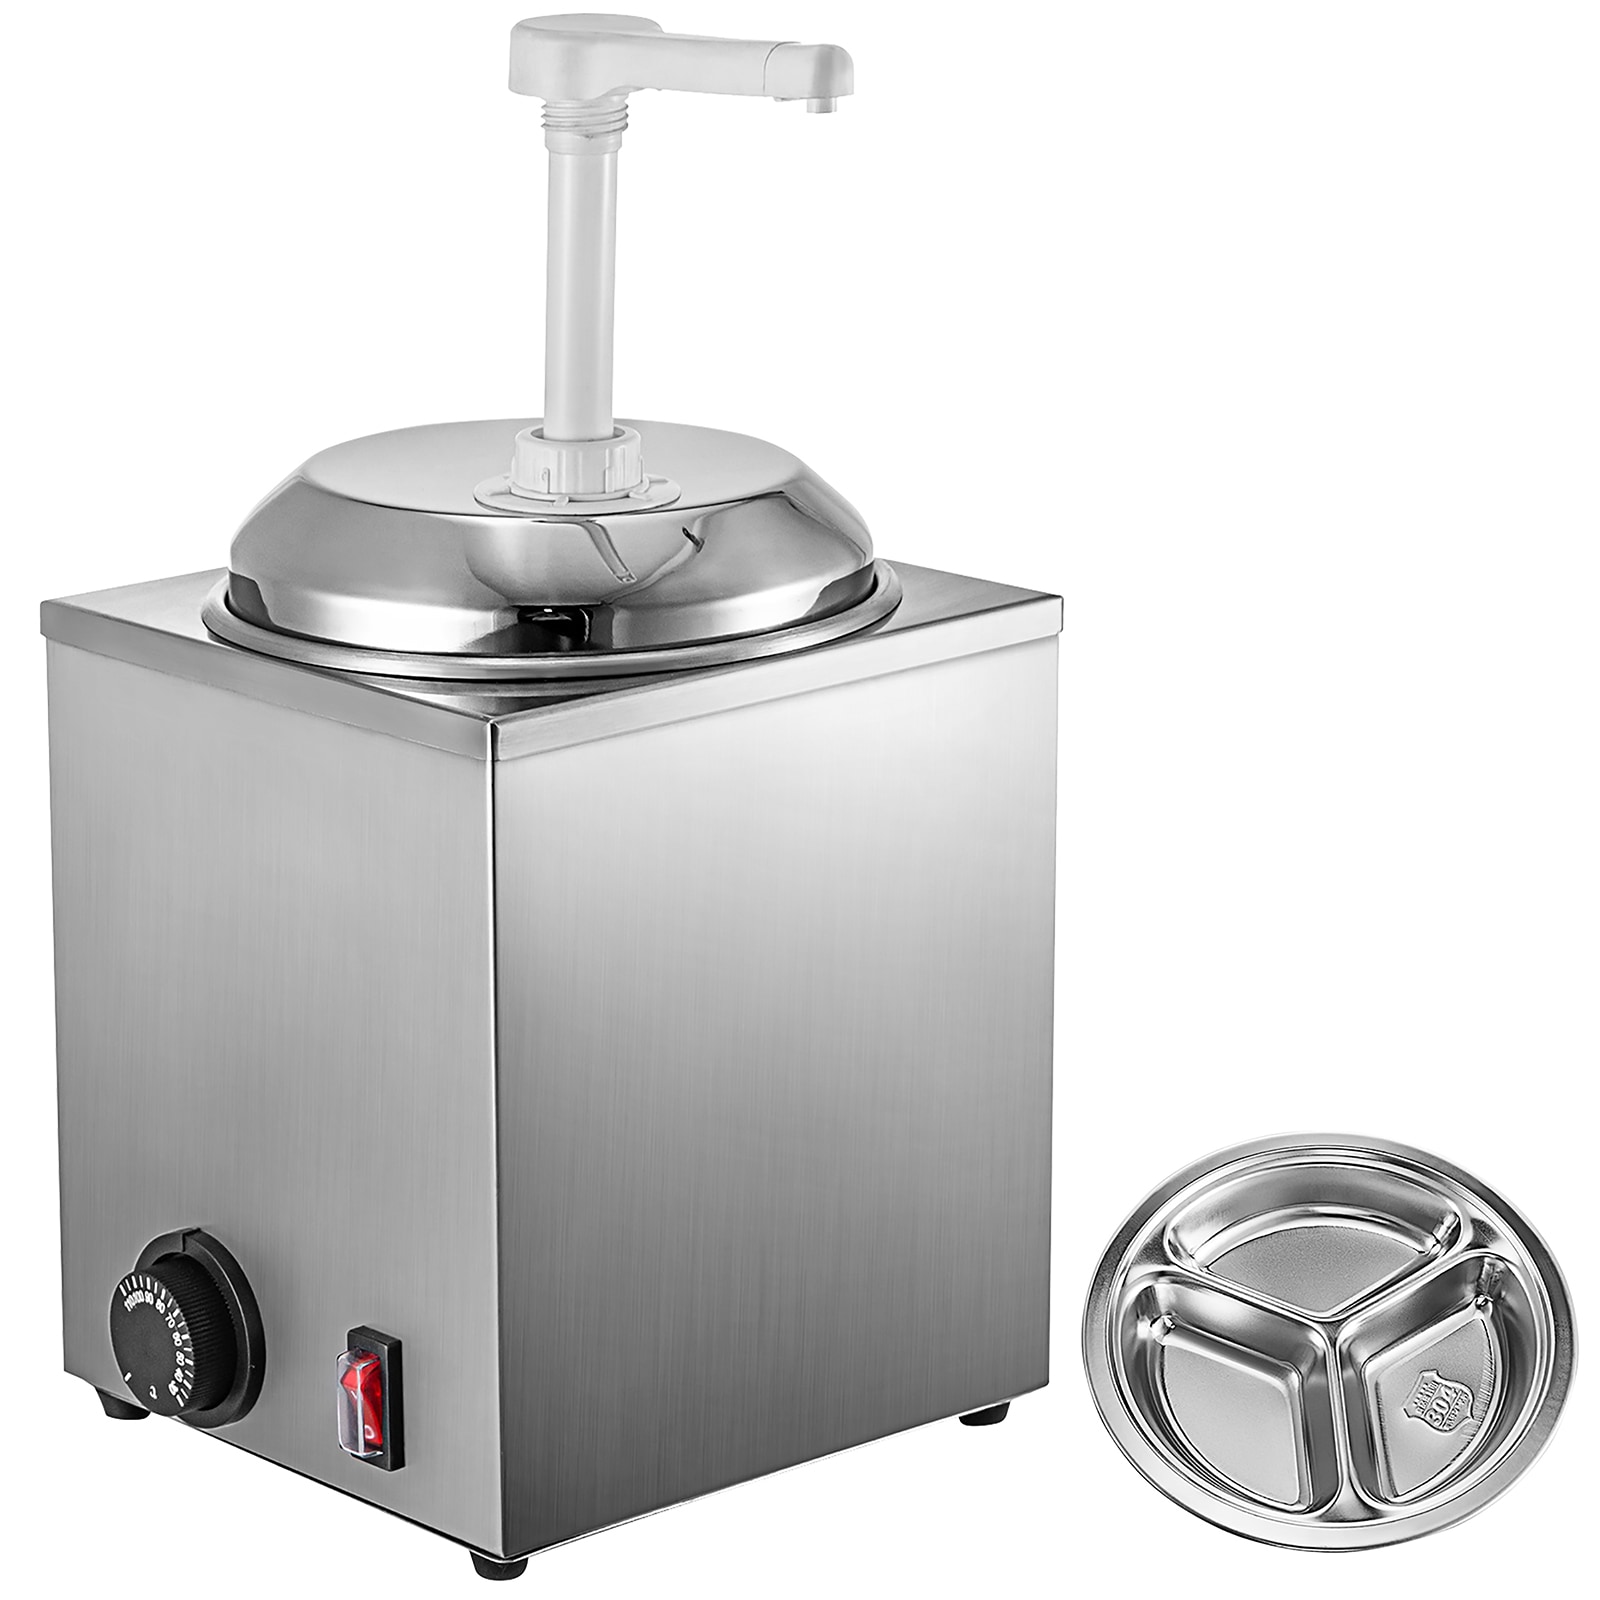 VEVOR 650W 2.4 QT Hot Fudge Warmer - Commercial/Residential Stainless Steel Cheese  Dispenser - Temperature Control - Includes Cleaning Brush & Spare Pump Tube  in the Specialty Small Kitchen Appliances department at